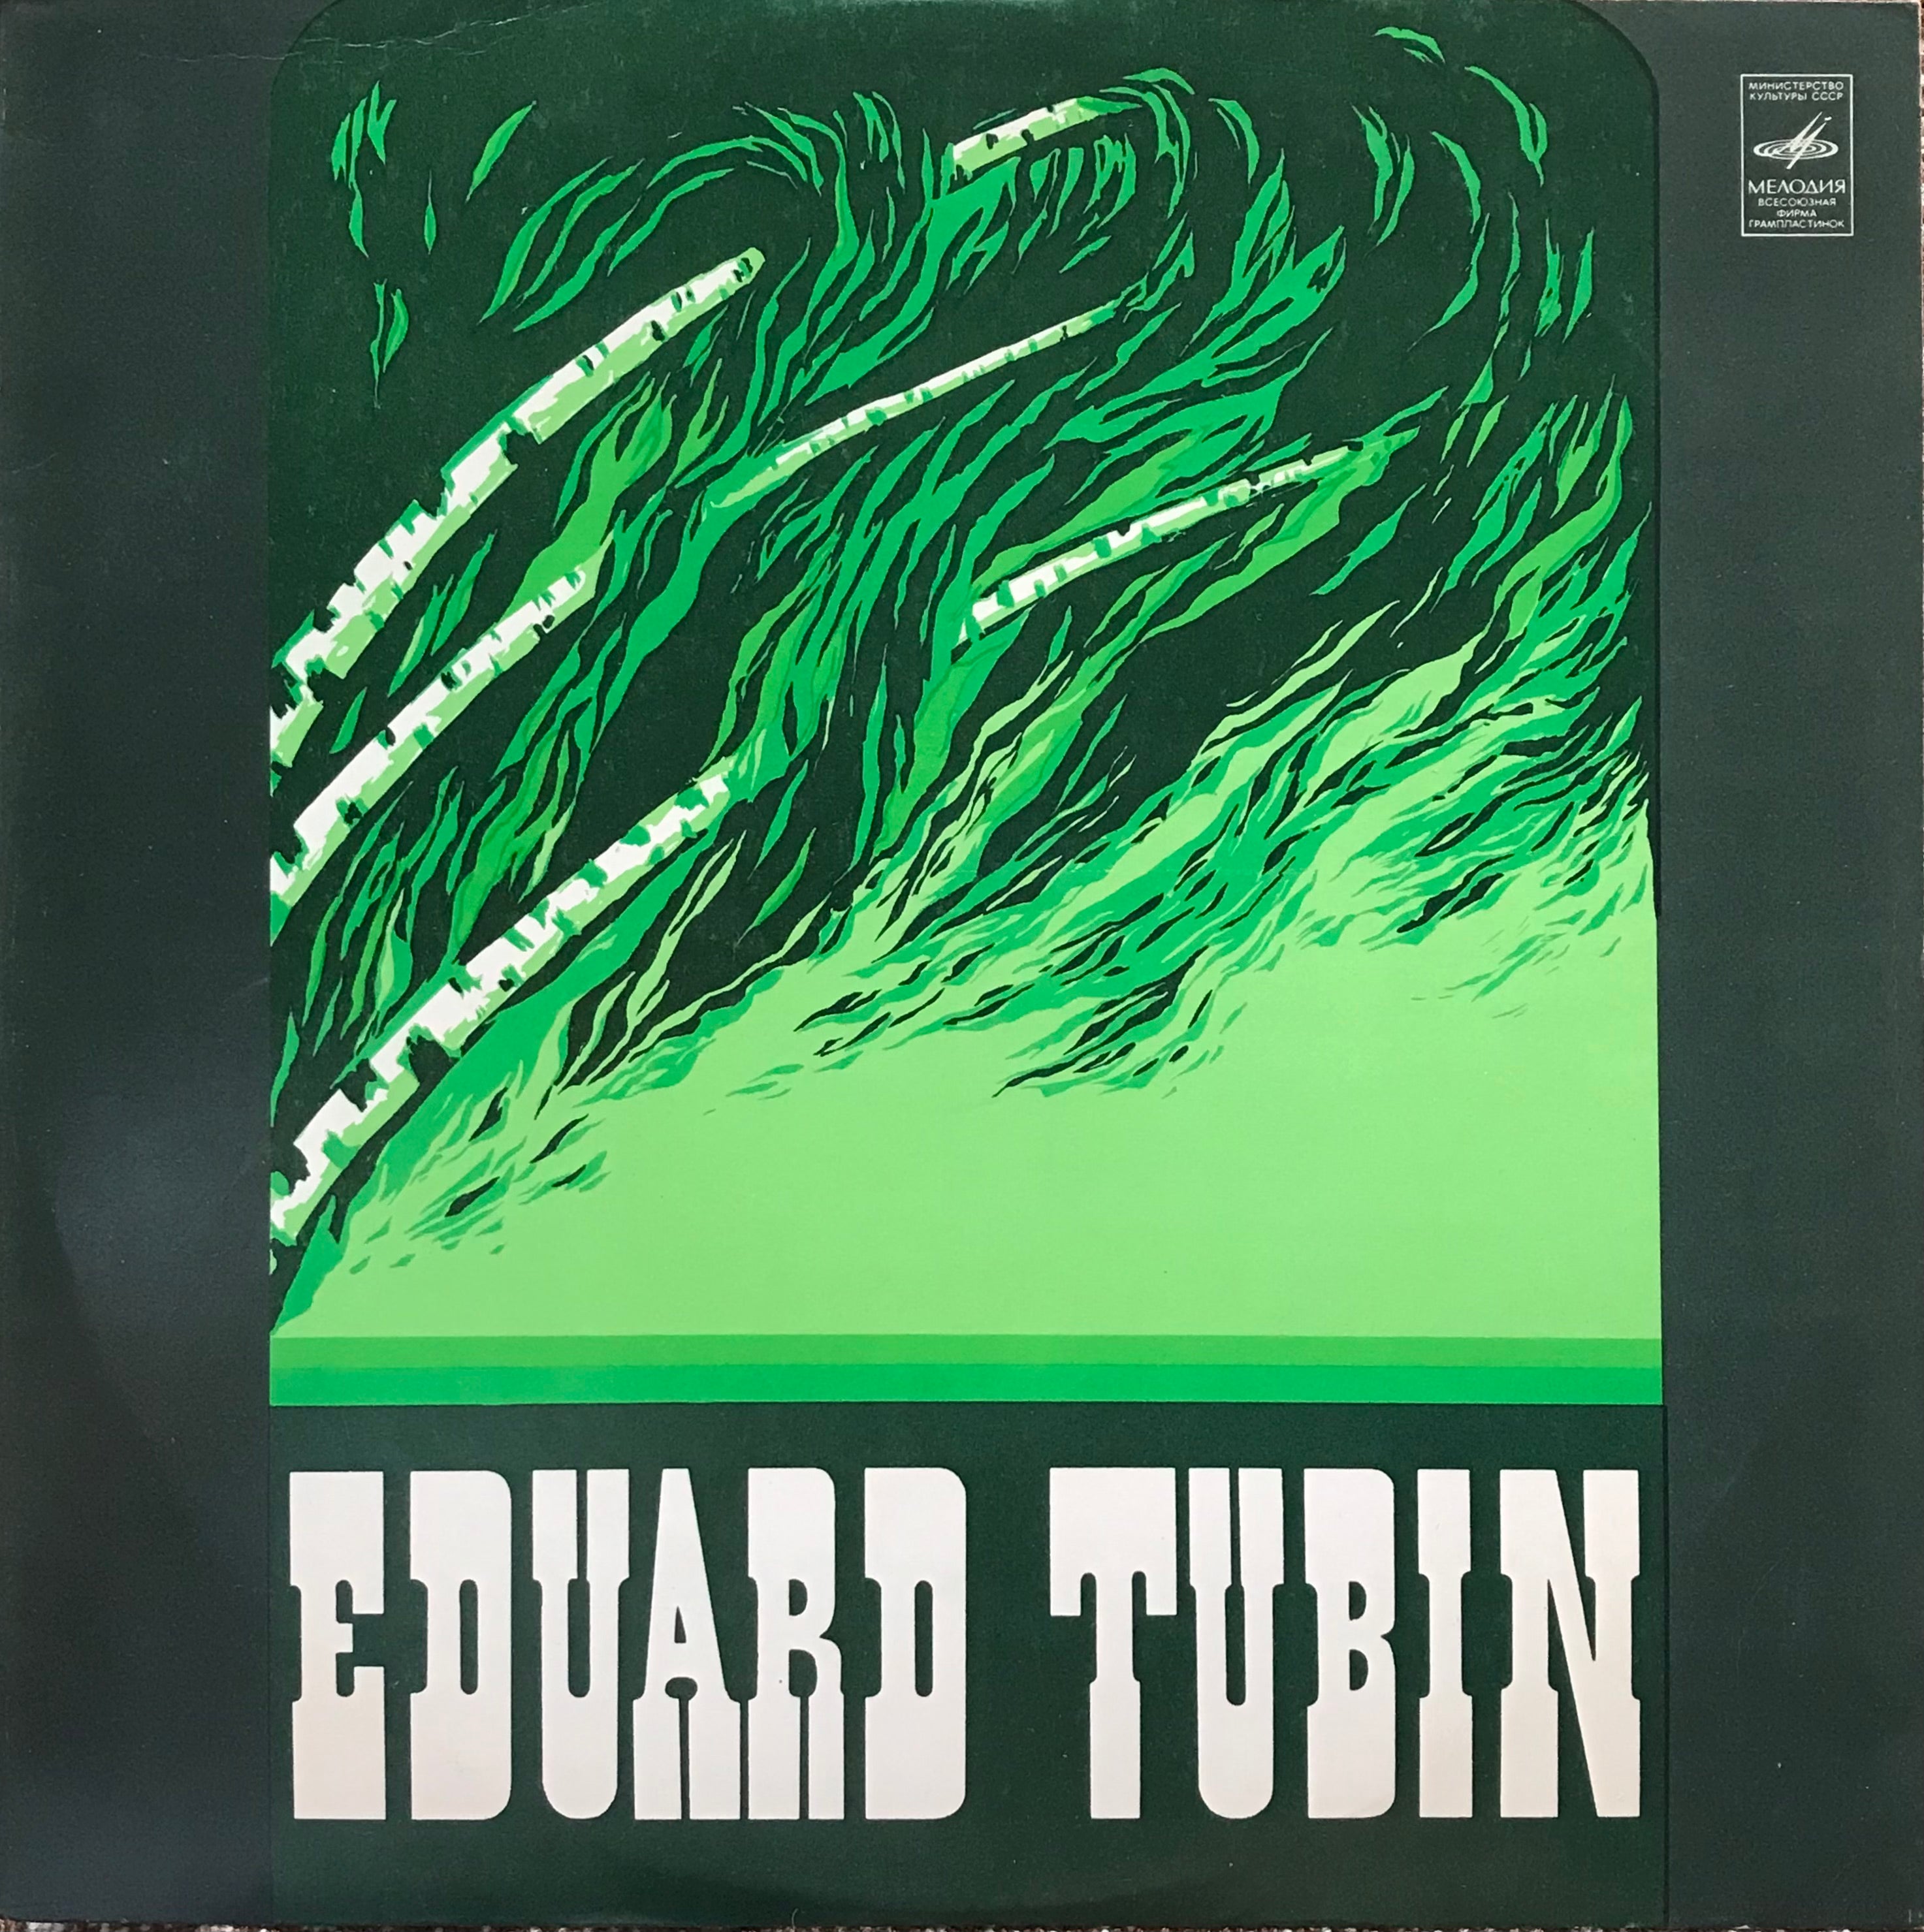 EDUARD TUBIN - Sonata for Piano (1950), Suite of Estonian Shepherd Tunes for Piano (1959), From the „Four Folksongs From My Native Country“ (1947) - LAINE METS (Piano)